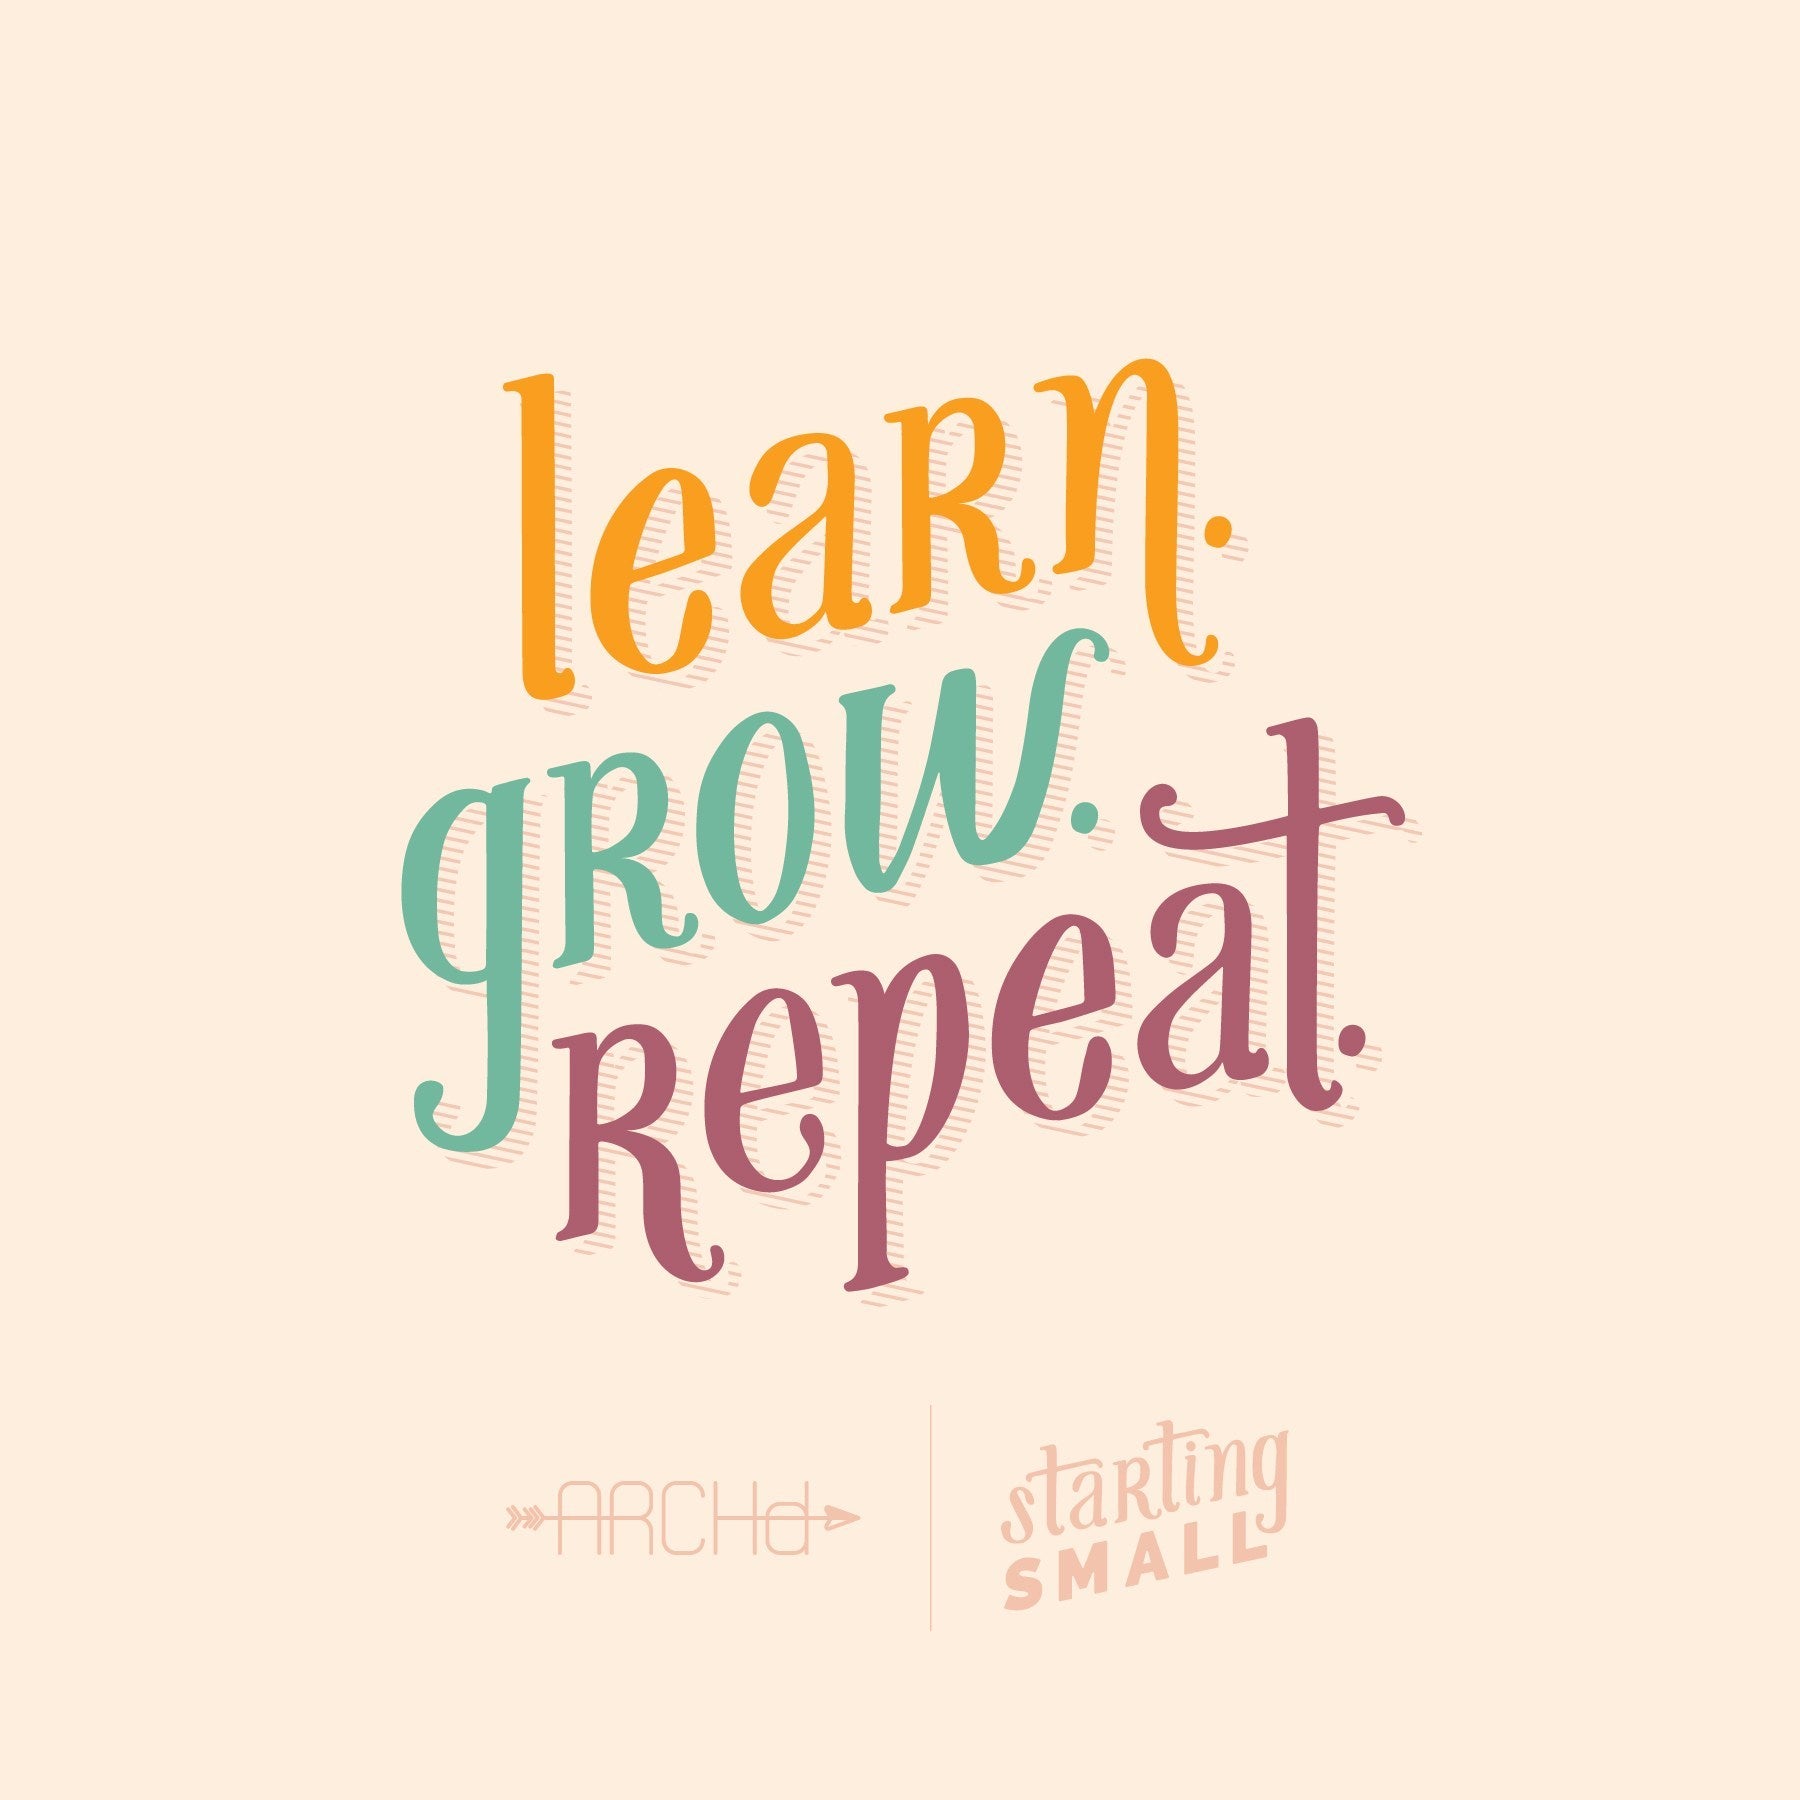 Learn Grow Repeat Starting Small a blog series by ARCHd about the adventures of starting a small business